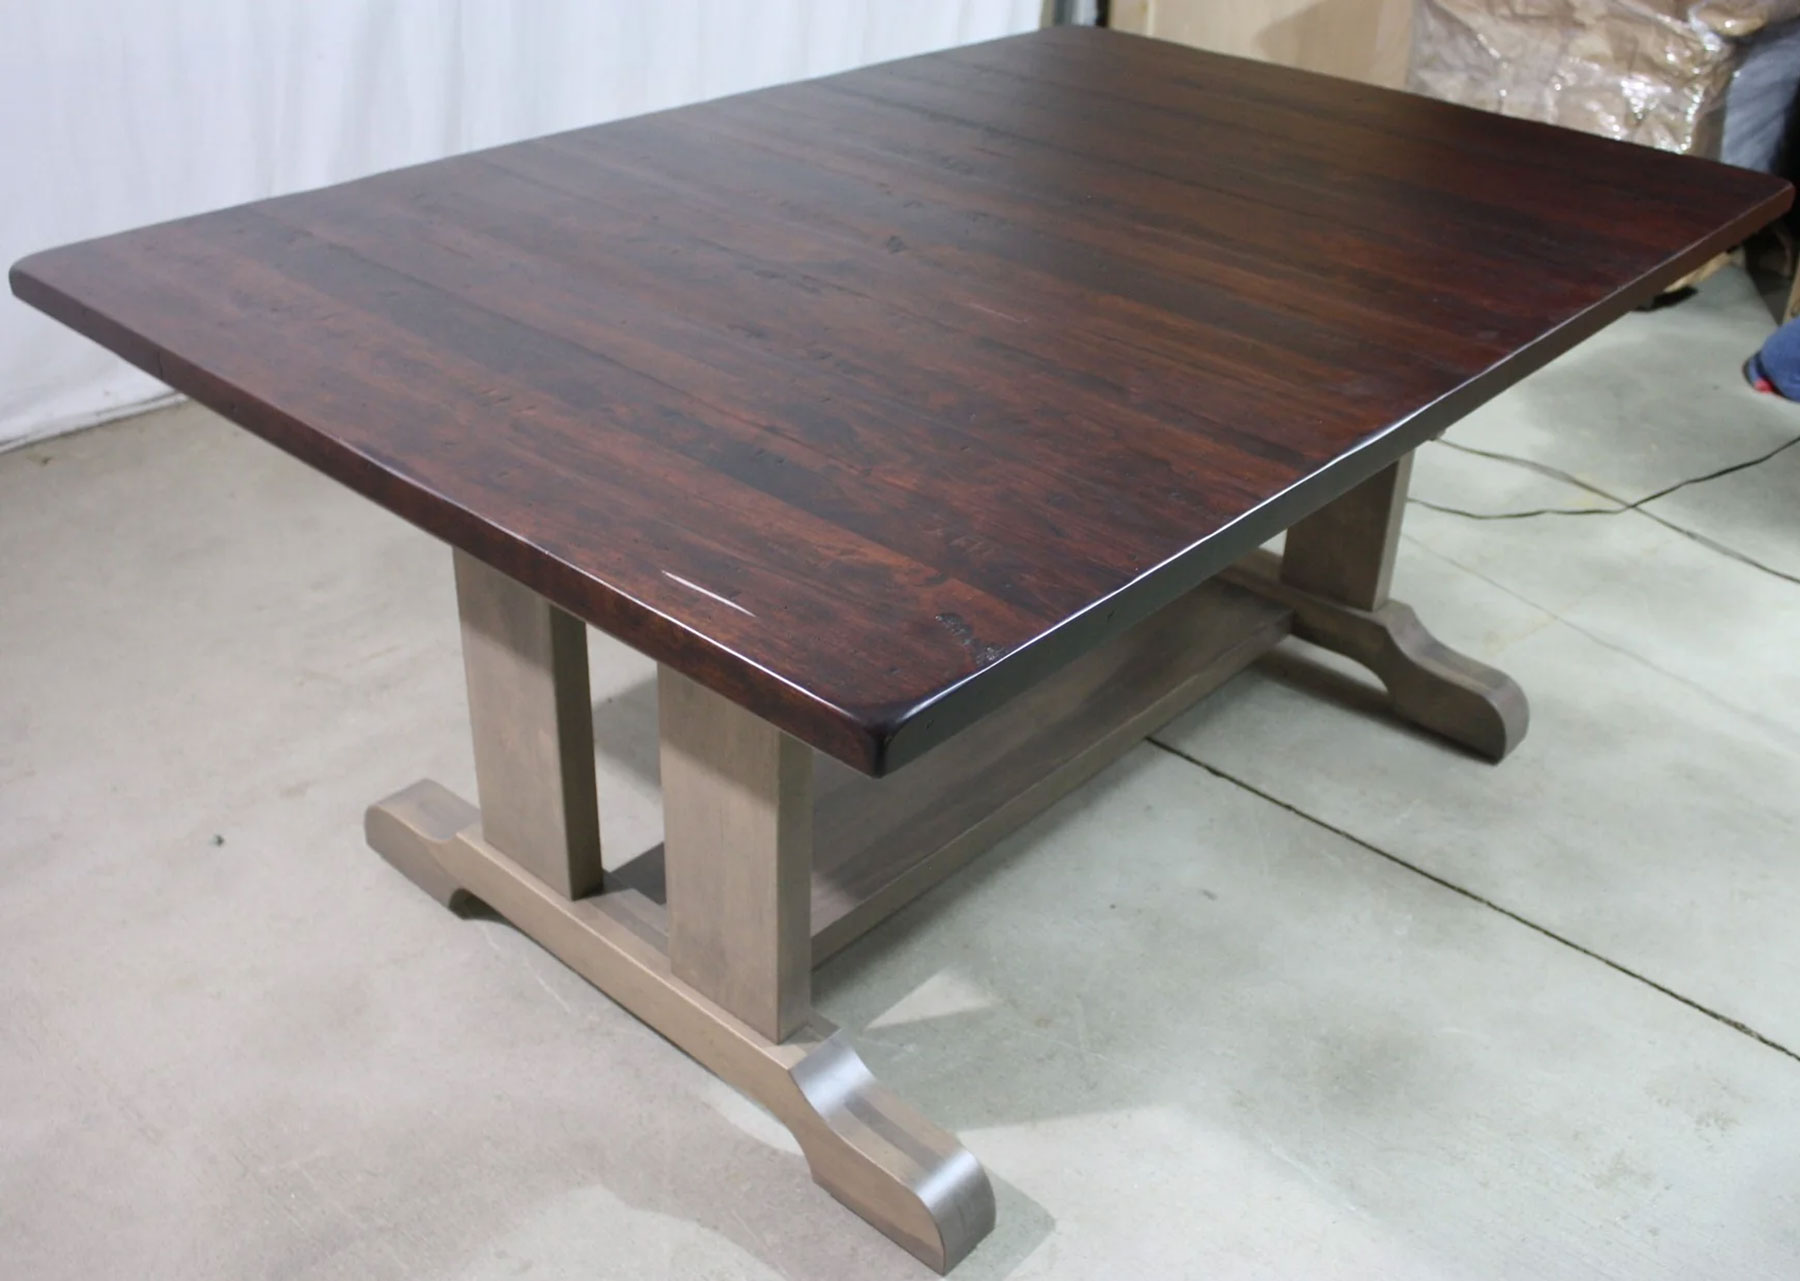 Wigal 44 x 66 Double Pedestal Table with Rustic Cherry Top